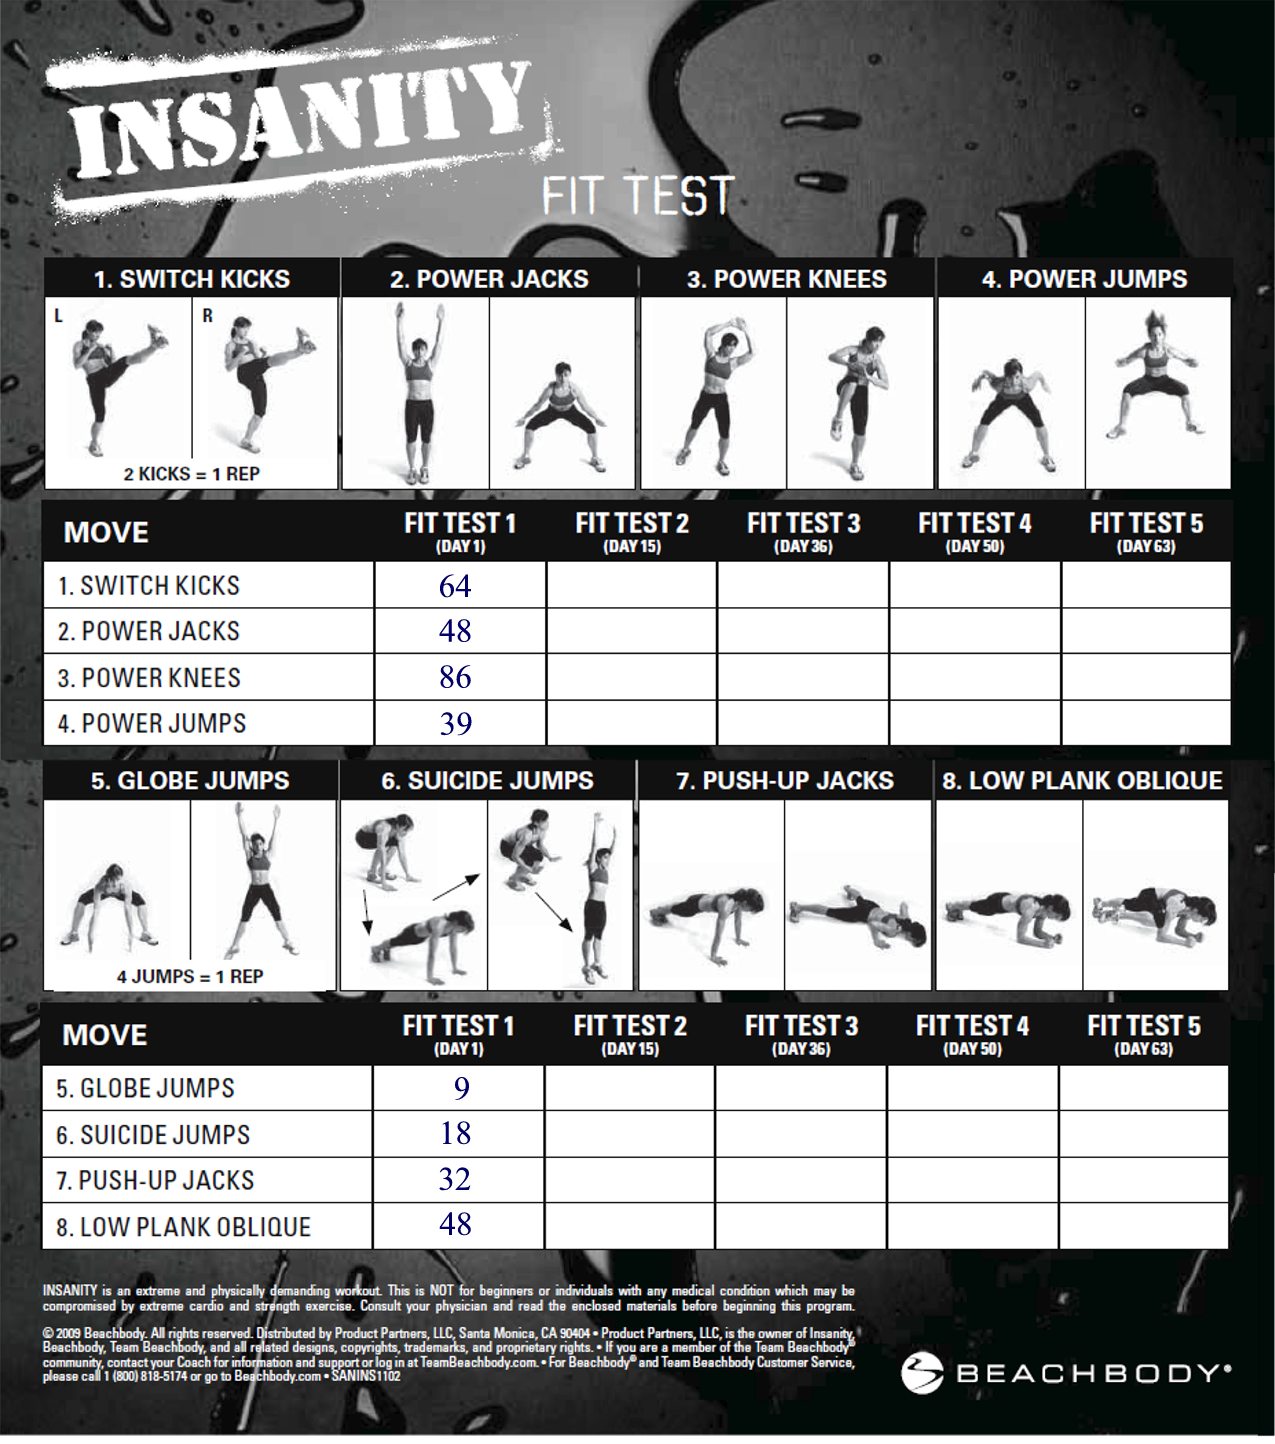  Insanity workout fit test exercises for Beginner